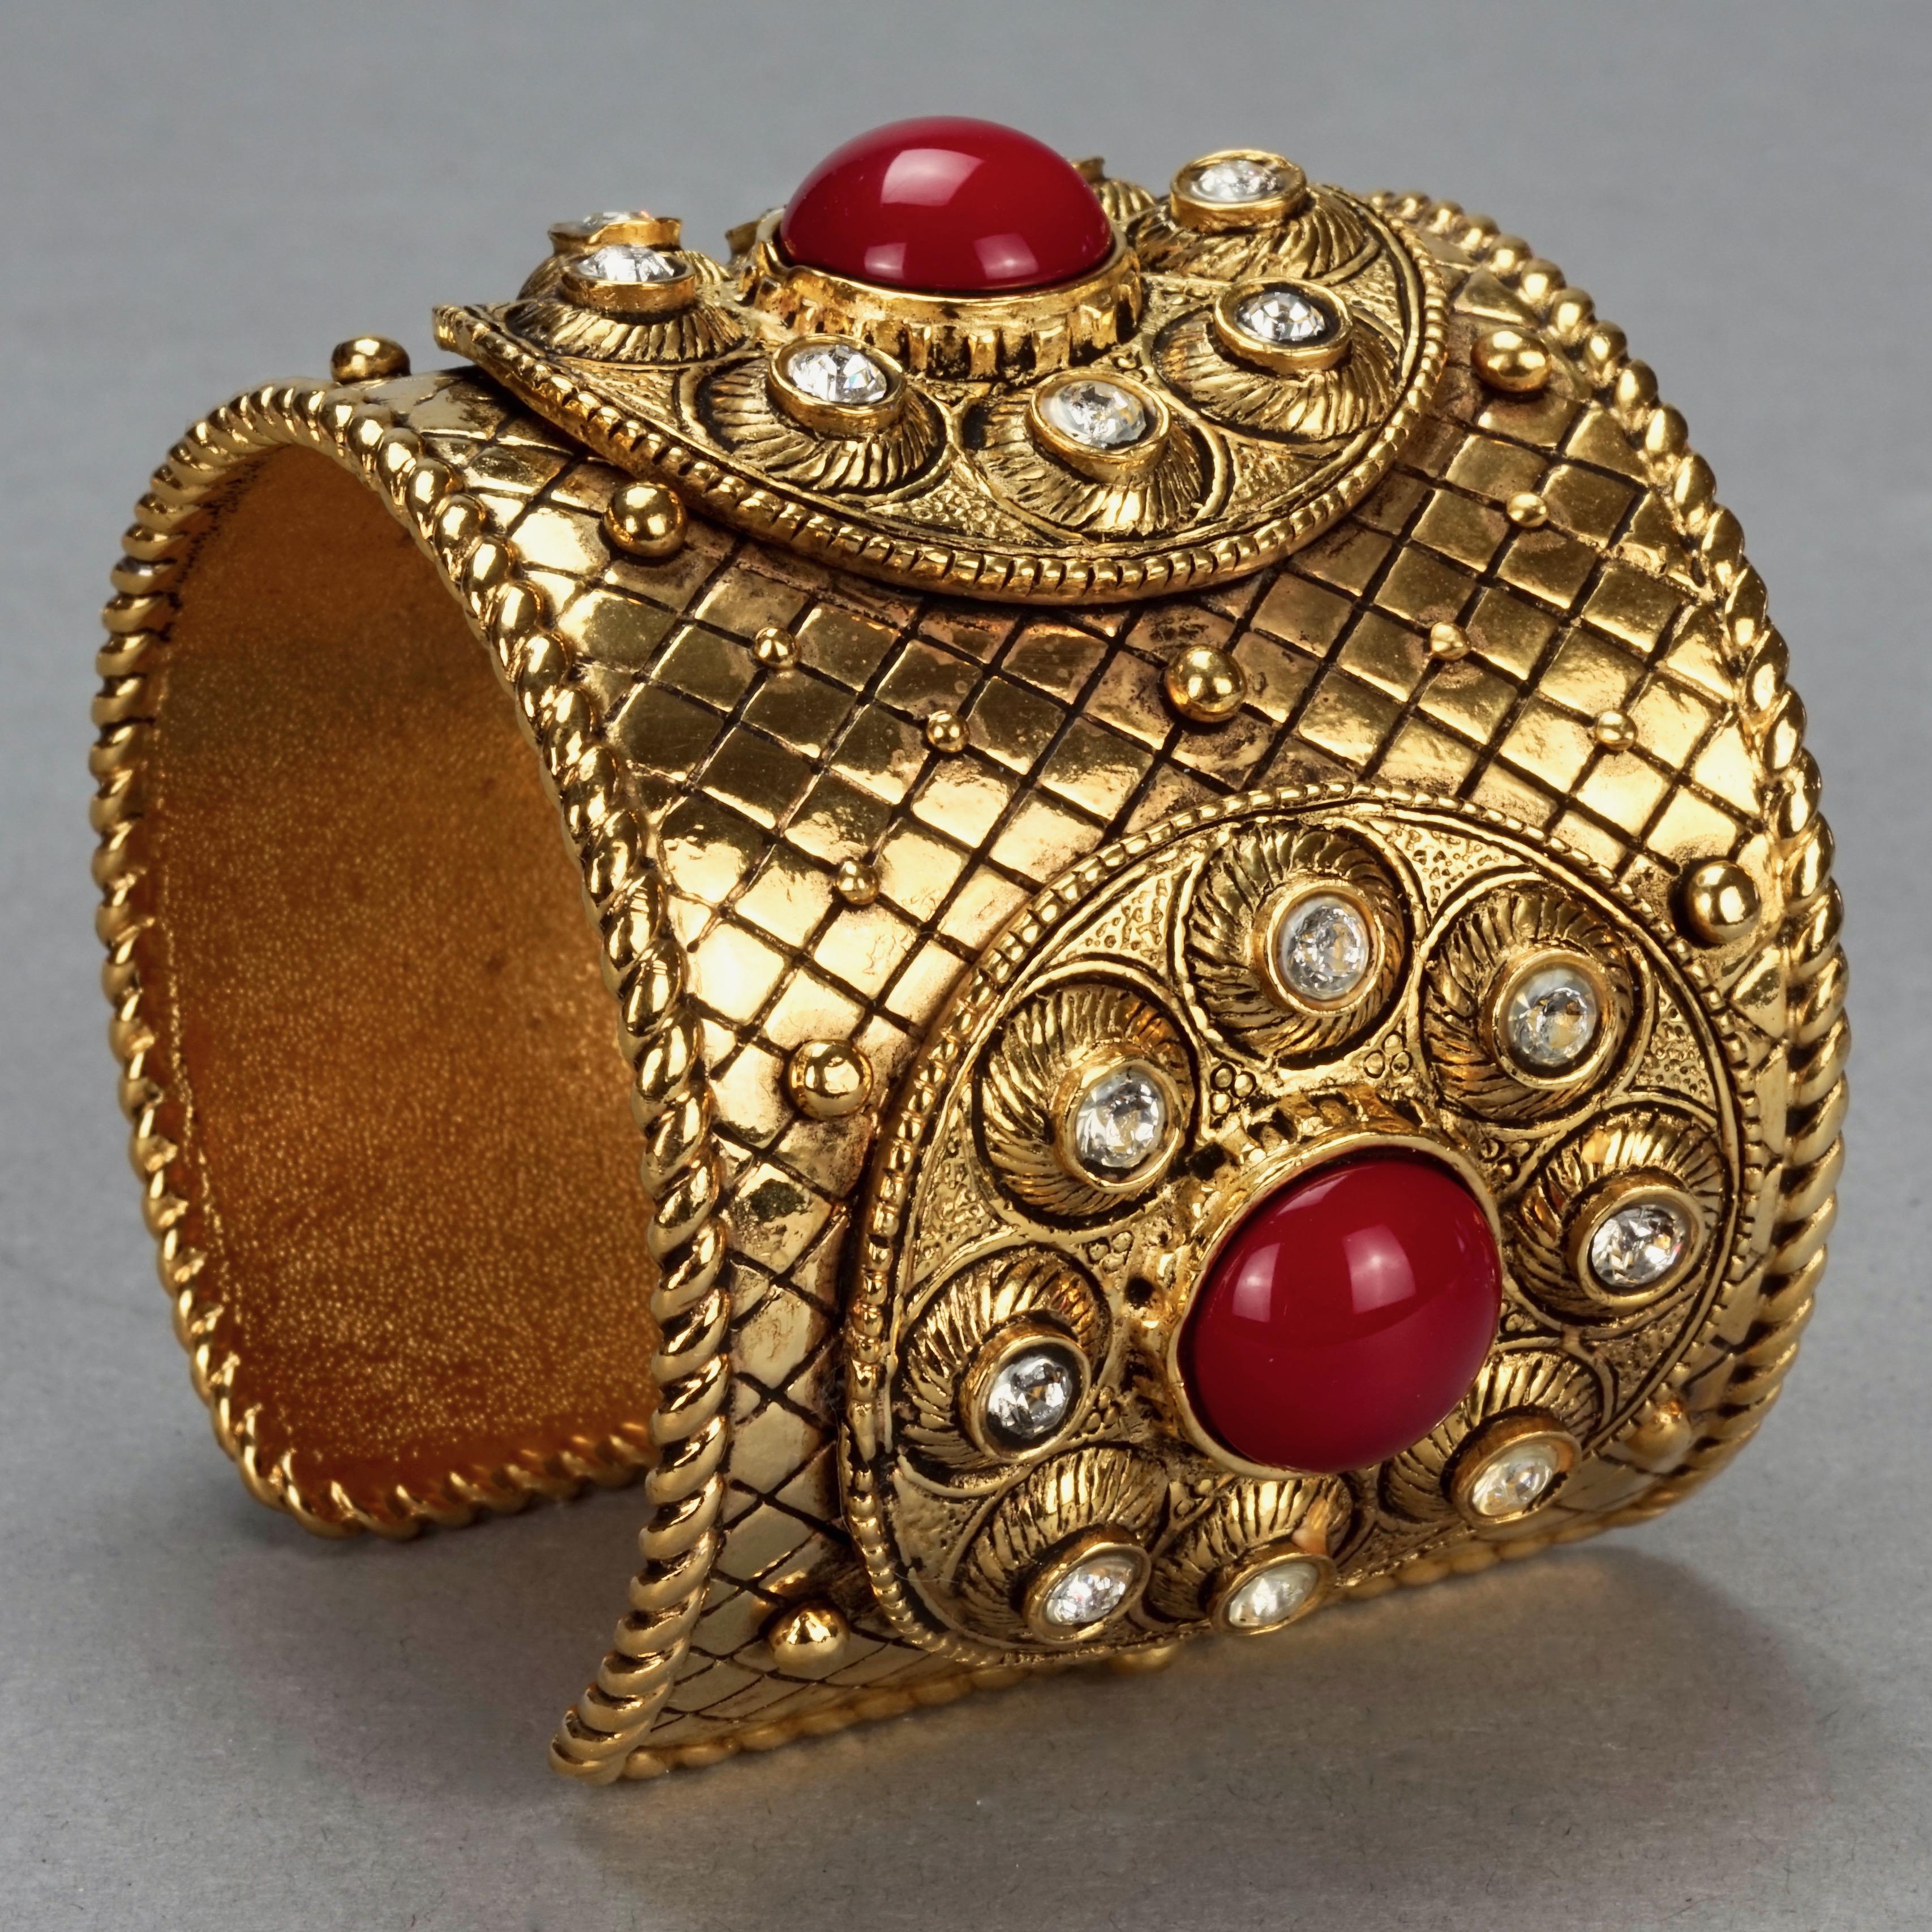 Vintage CHRISTIAN DIOR BOUTIQUE Quilted Cabochon Rhinestone Mogul Cuff Bracelet In Excellent Condition For Sale In Kingersheim, Alsace